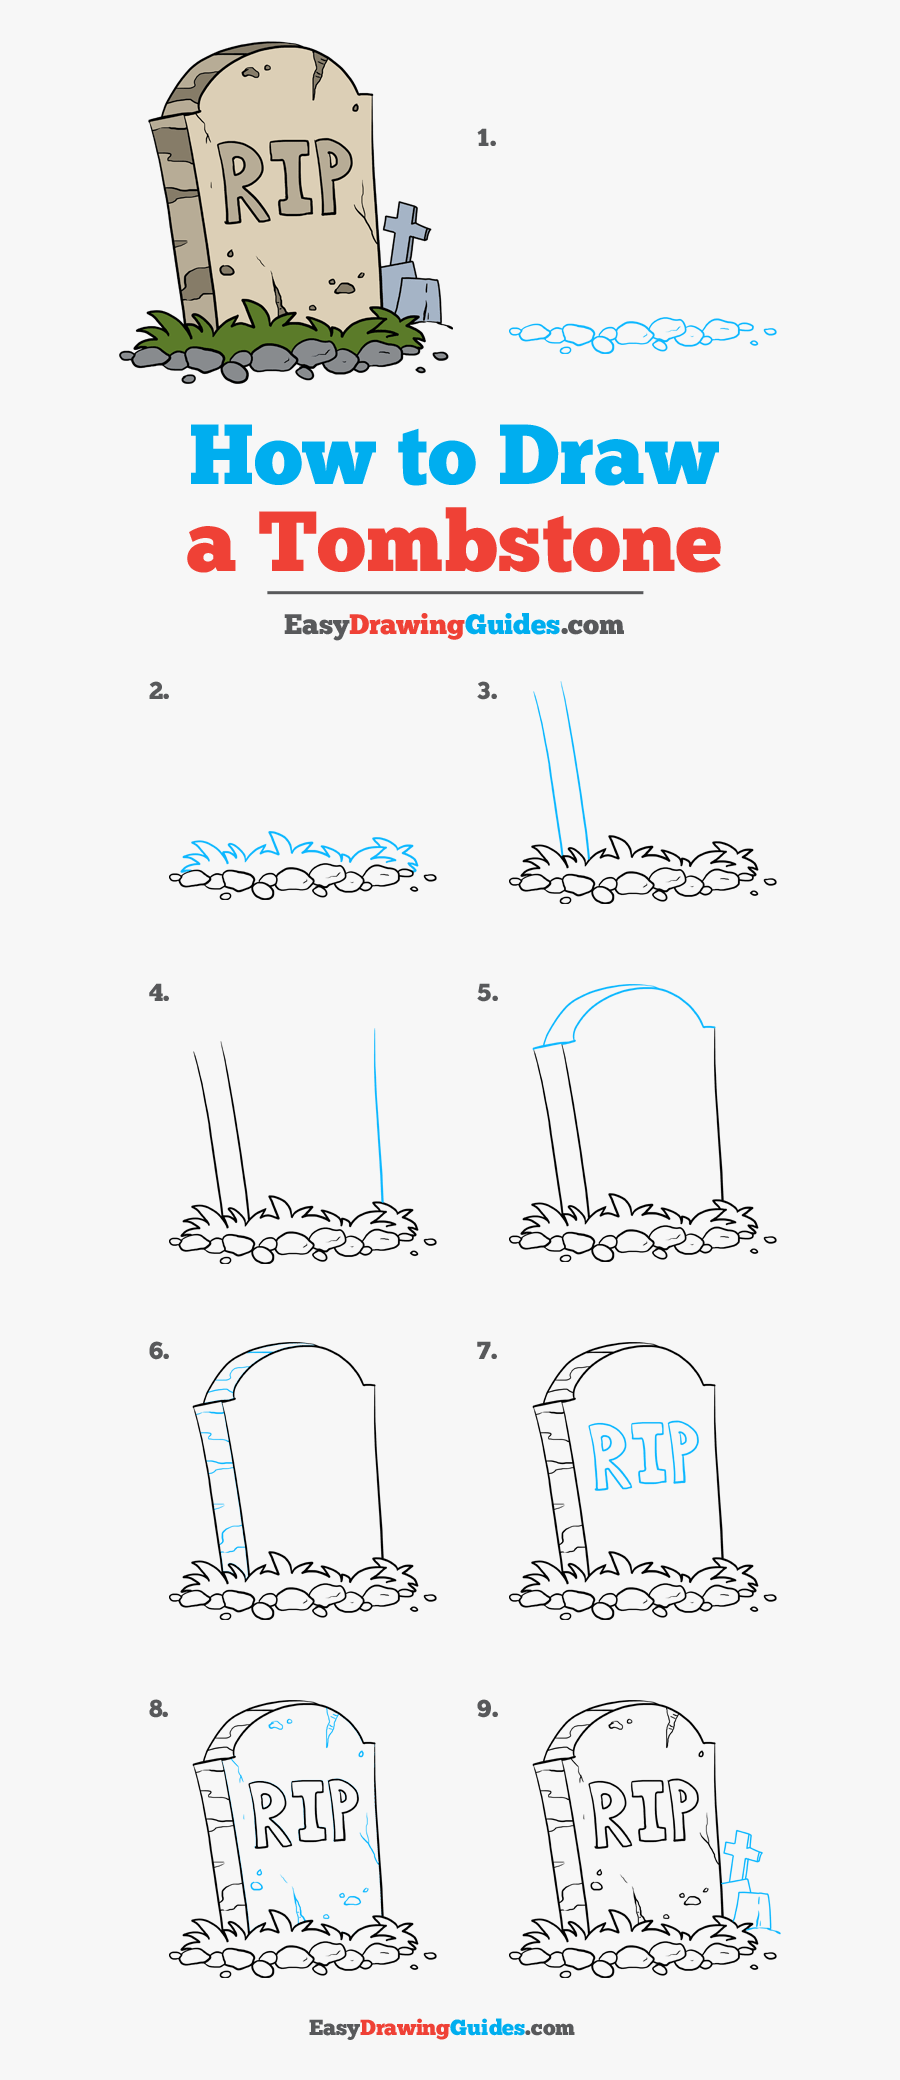 How To Draw Tombstone - Draw A Tomato Step By Step Easy, Transparent Clipart